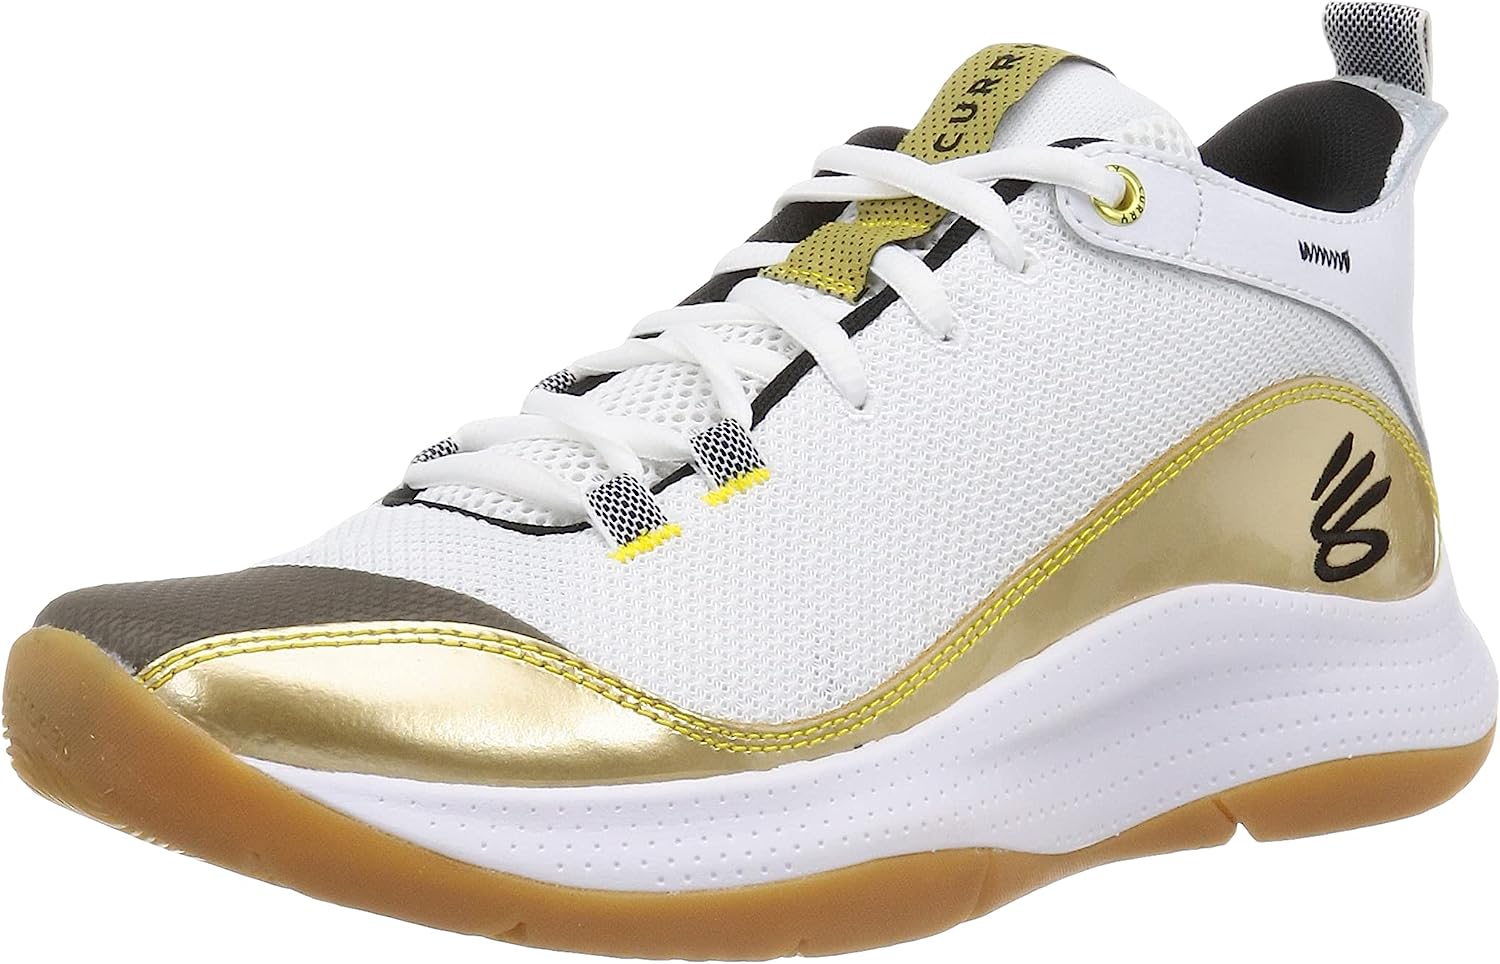 Under Armour Steph Curry 3Z5 NM Sneakers